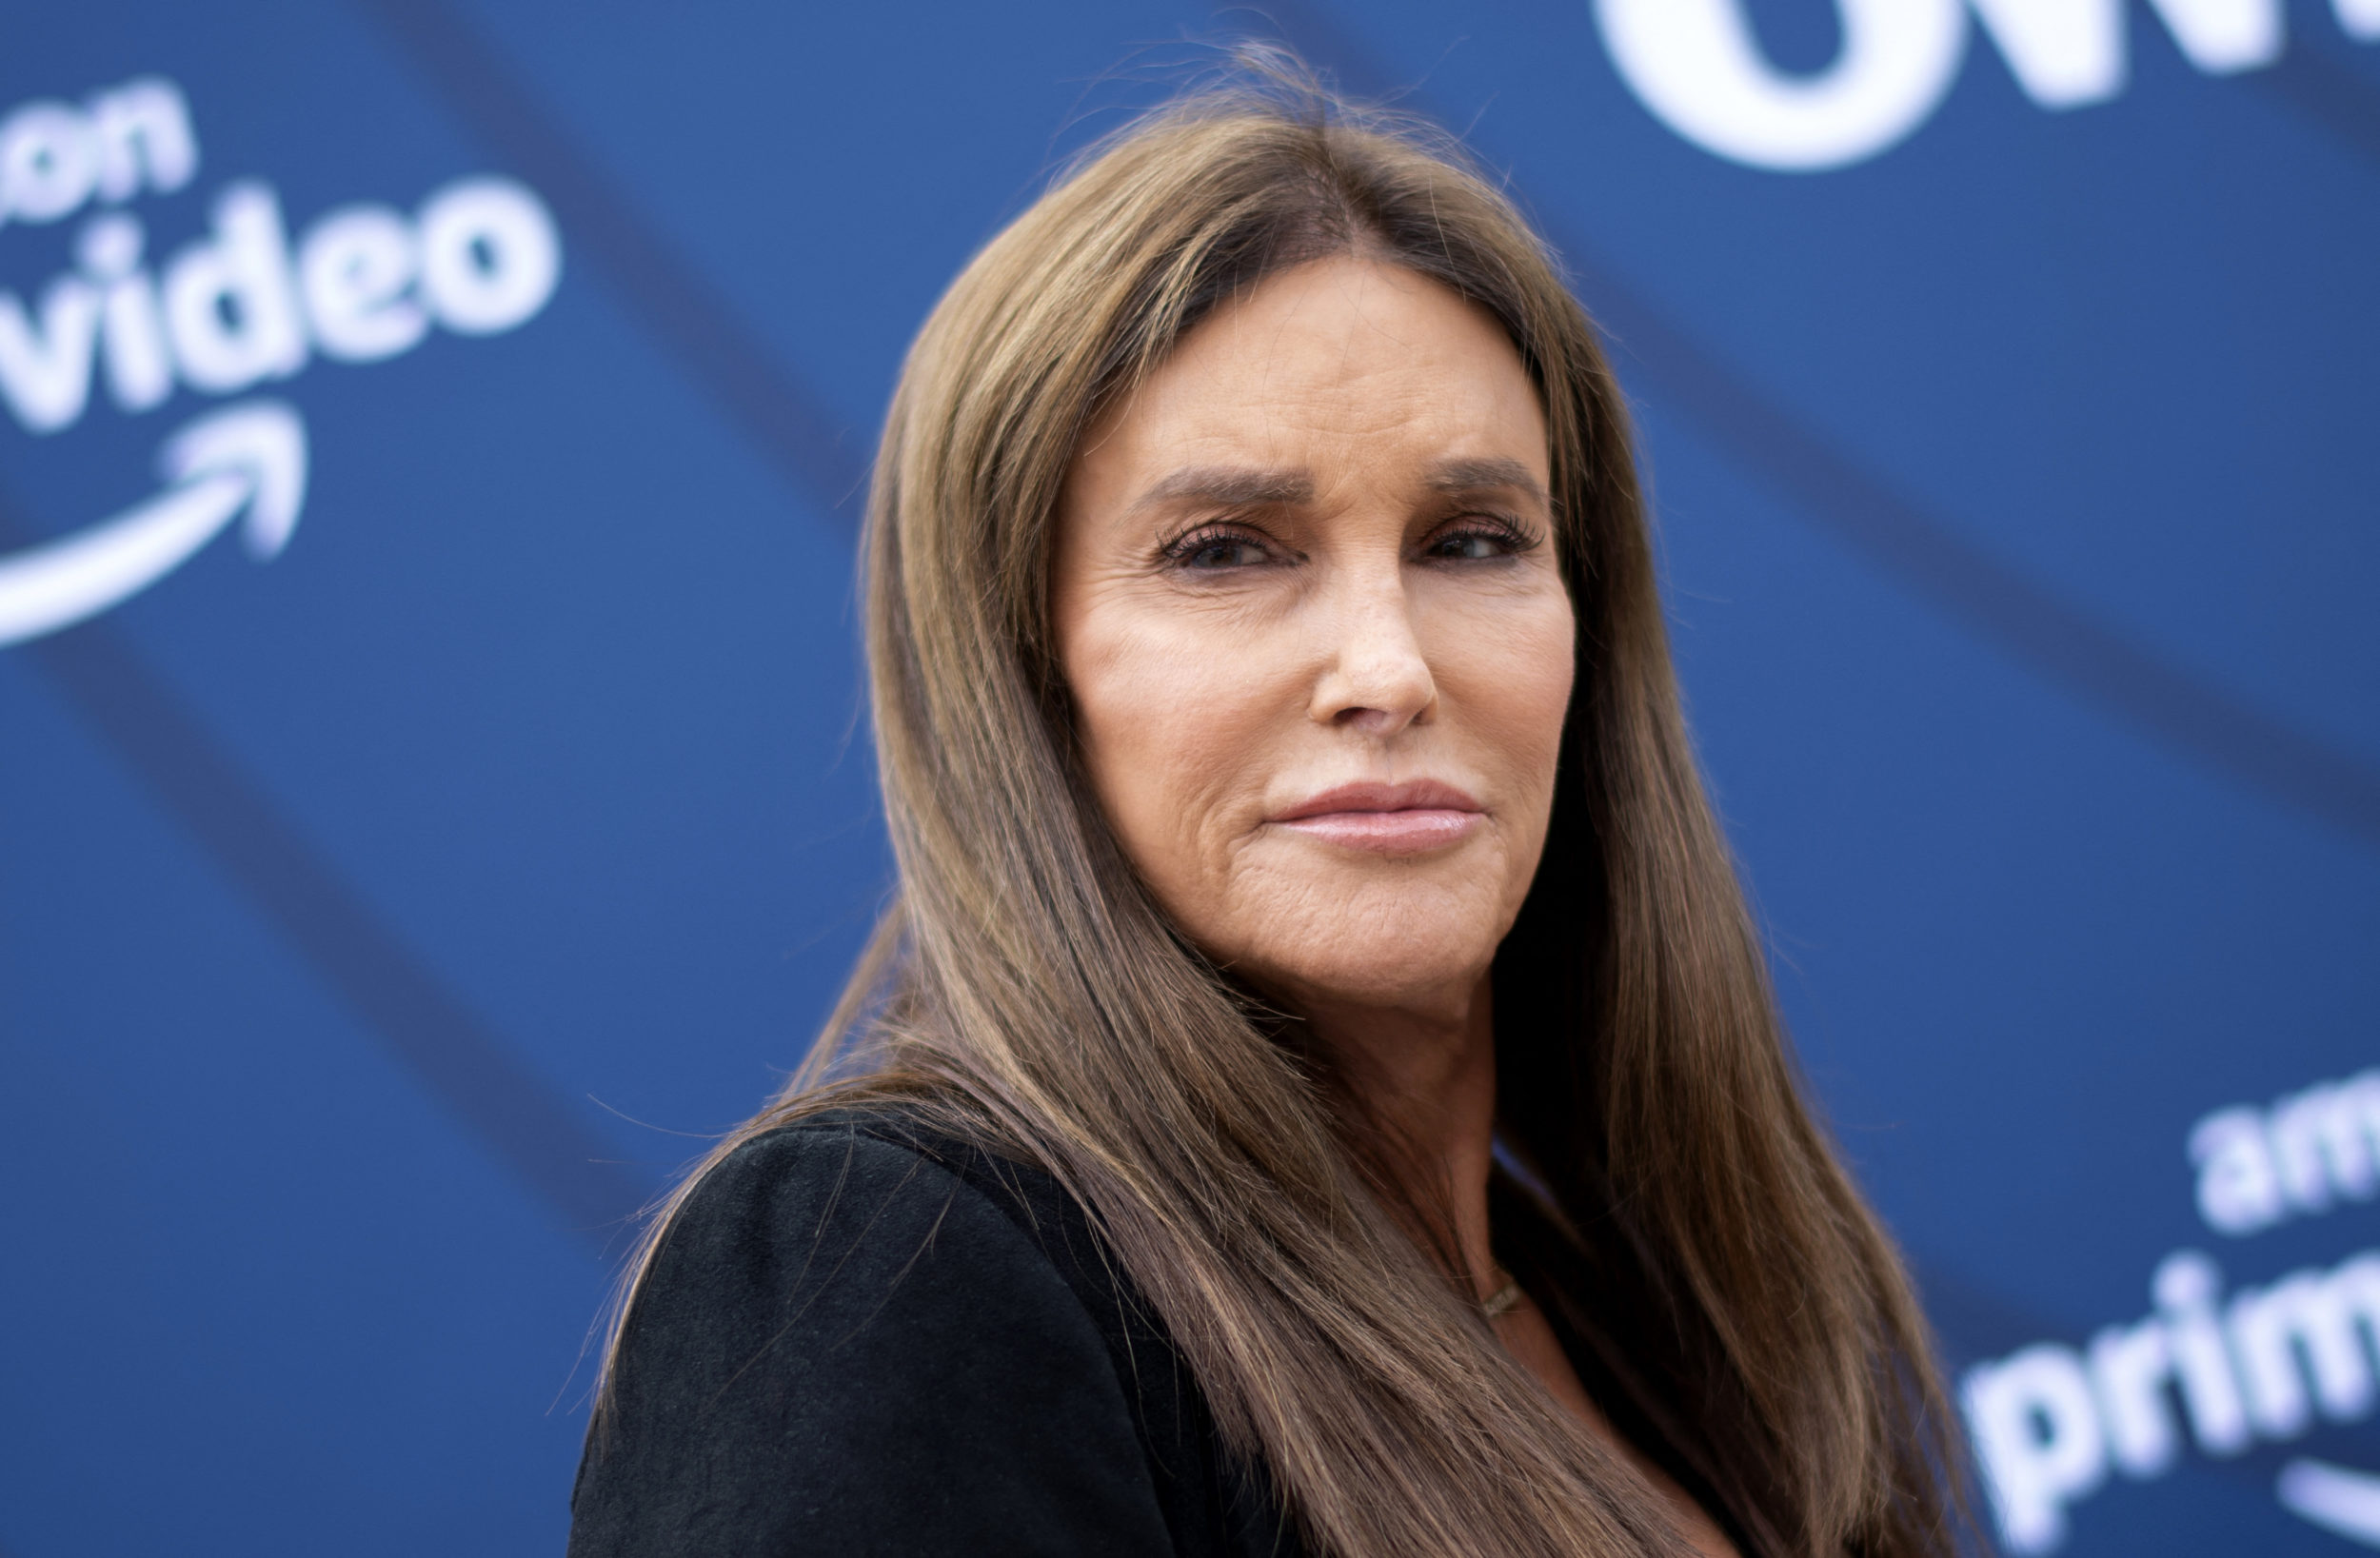 Caitlyn Jenner wants to be California governor